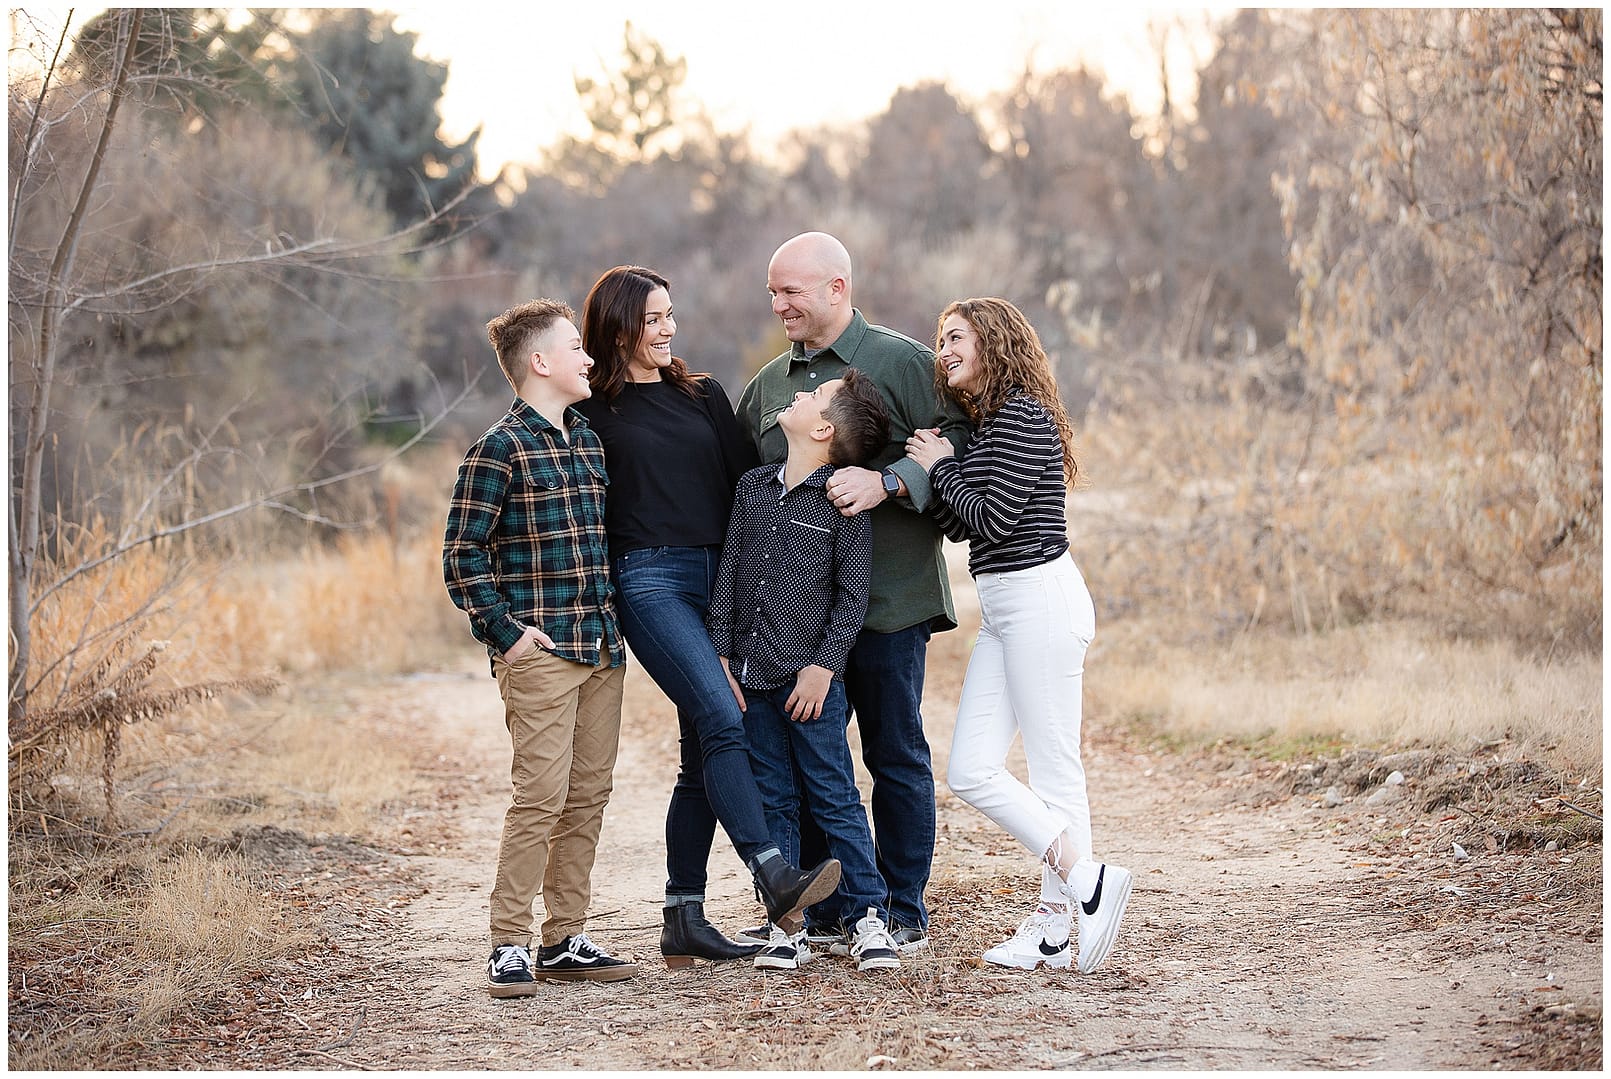 Boise,ID Family in open space setting. Photos by Tiffany Hix Photography.